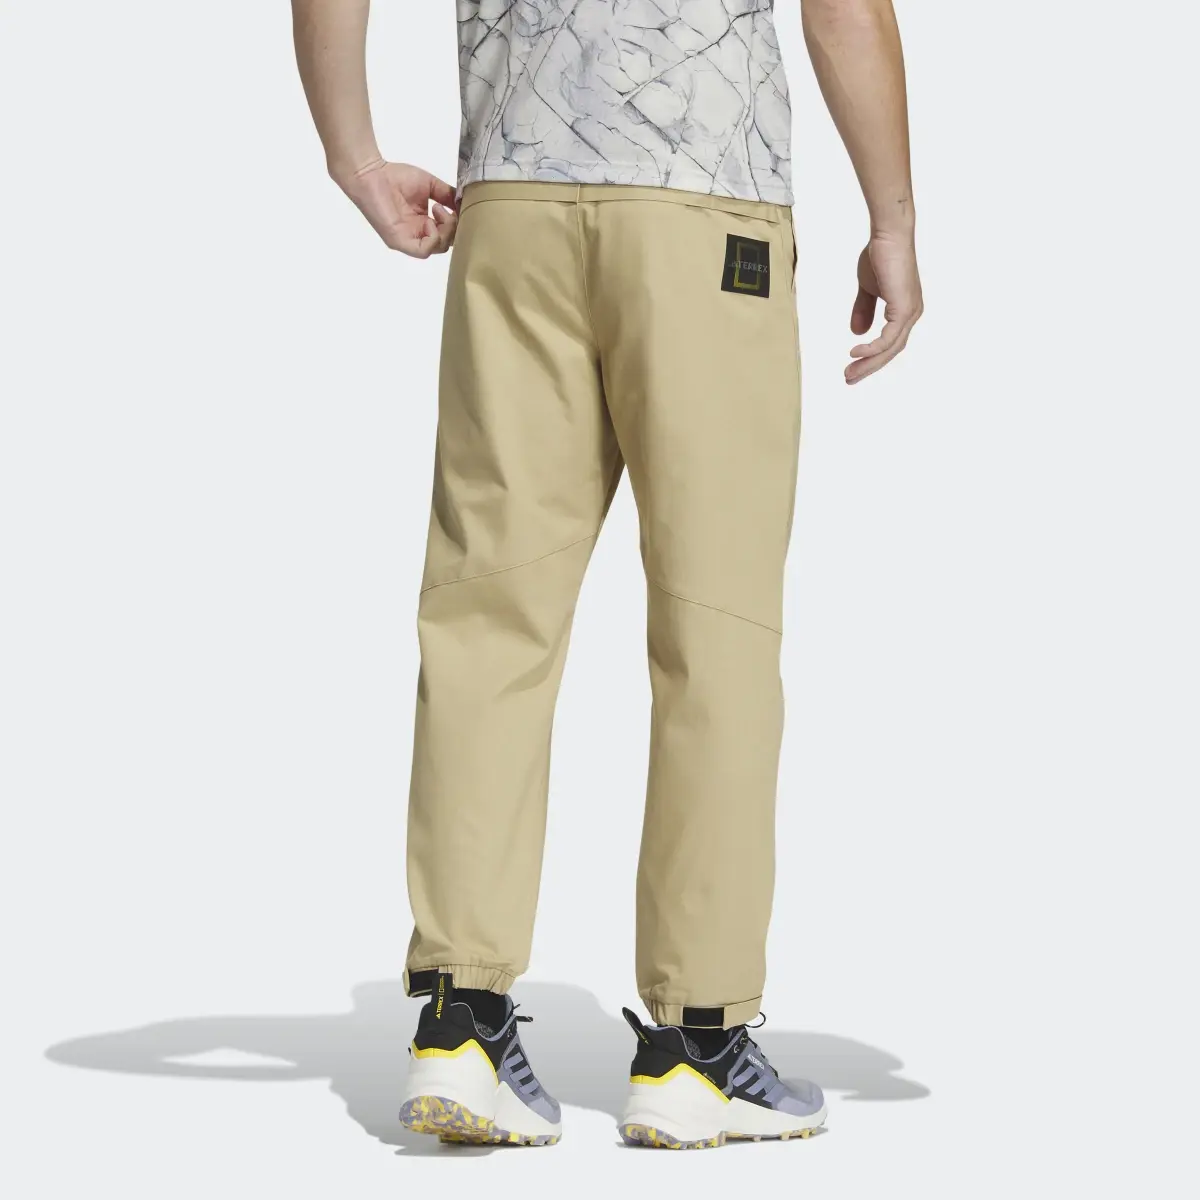 Adidas National Geographic Twill Pants. 2